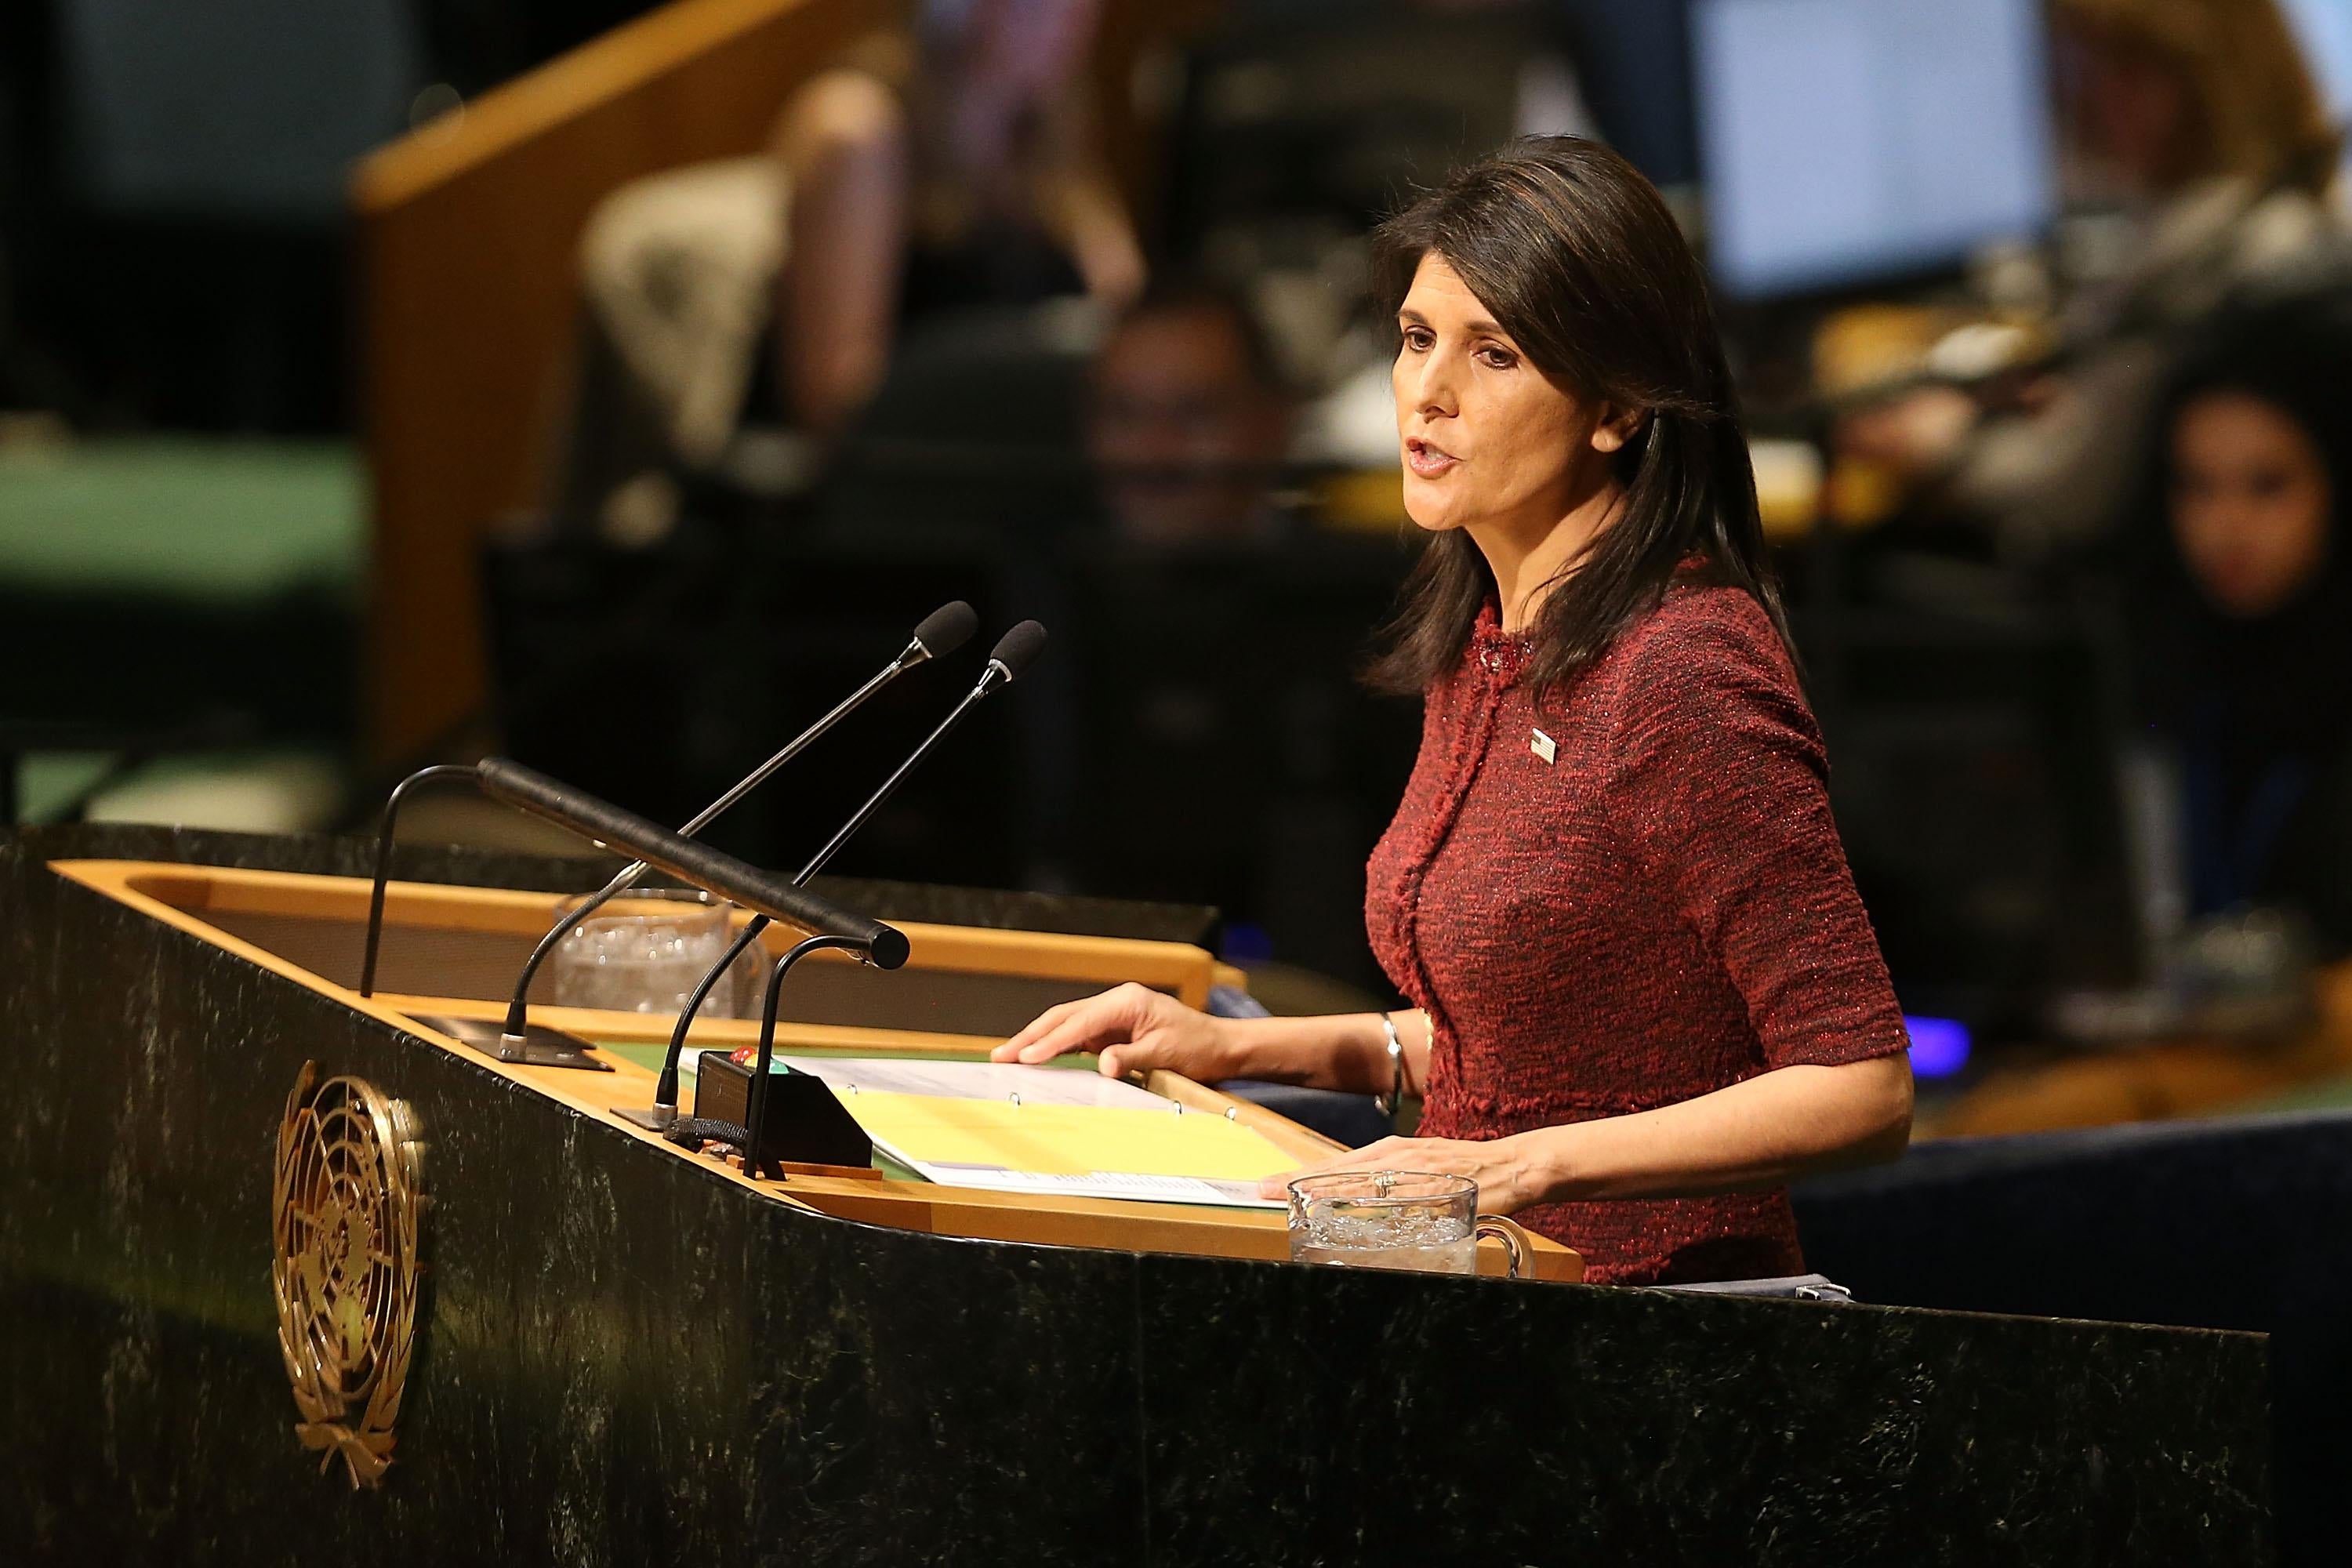 NEW YORK, NY - DECEMBER 21:  Nikki Haley, United States Ambassador to the United Nations, speaks on the floor of the General Assembly on December 21, 2017 in New York City. A vote is scheduled at the United Nations General Assembly today concerning Washington's decision to recognize Jerusalem as Israel's capital and relocate its embassy there. The US, which alone vetoed a resolution put to the Security Council on the move to Jerusalem, cannot veto General Assembly motions, which require a simple majority to be adopted. The Trump administration has threatened to take action against any country that votes against the United States decision to move its embassy.  (Photo by Spencer Platt/Getty Images)